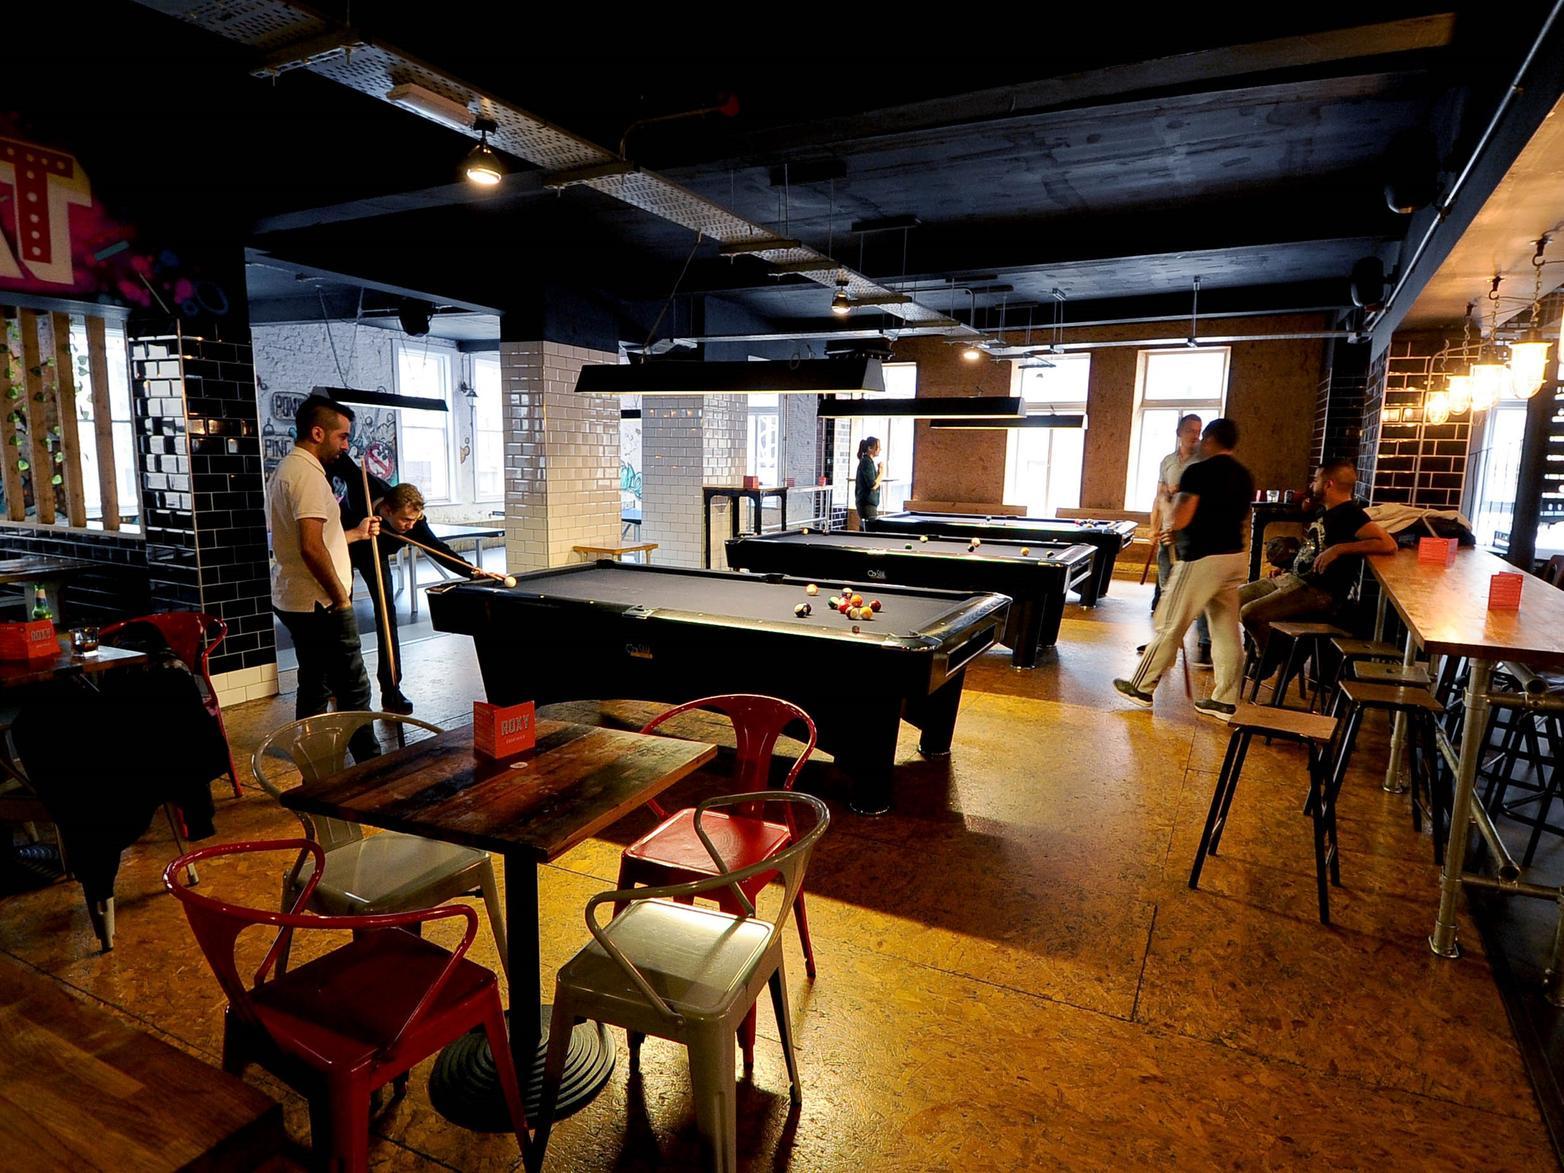 Home to ping pong tables, pool, a nine hole mini golf course and beer pong stations, Roxy Ball Room isnt your average bar, with visitors encouraged to unwind with some competitive play alongside a few drinks.